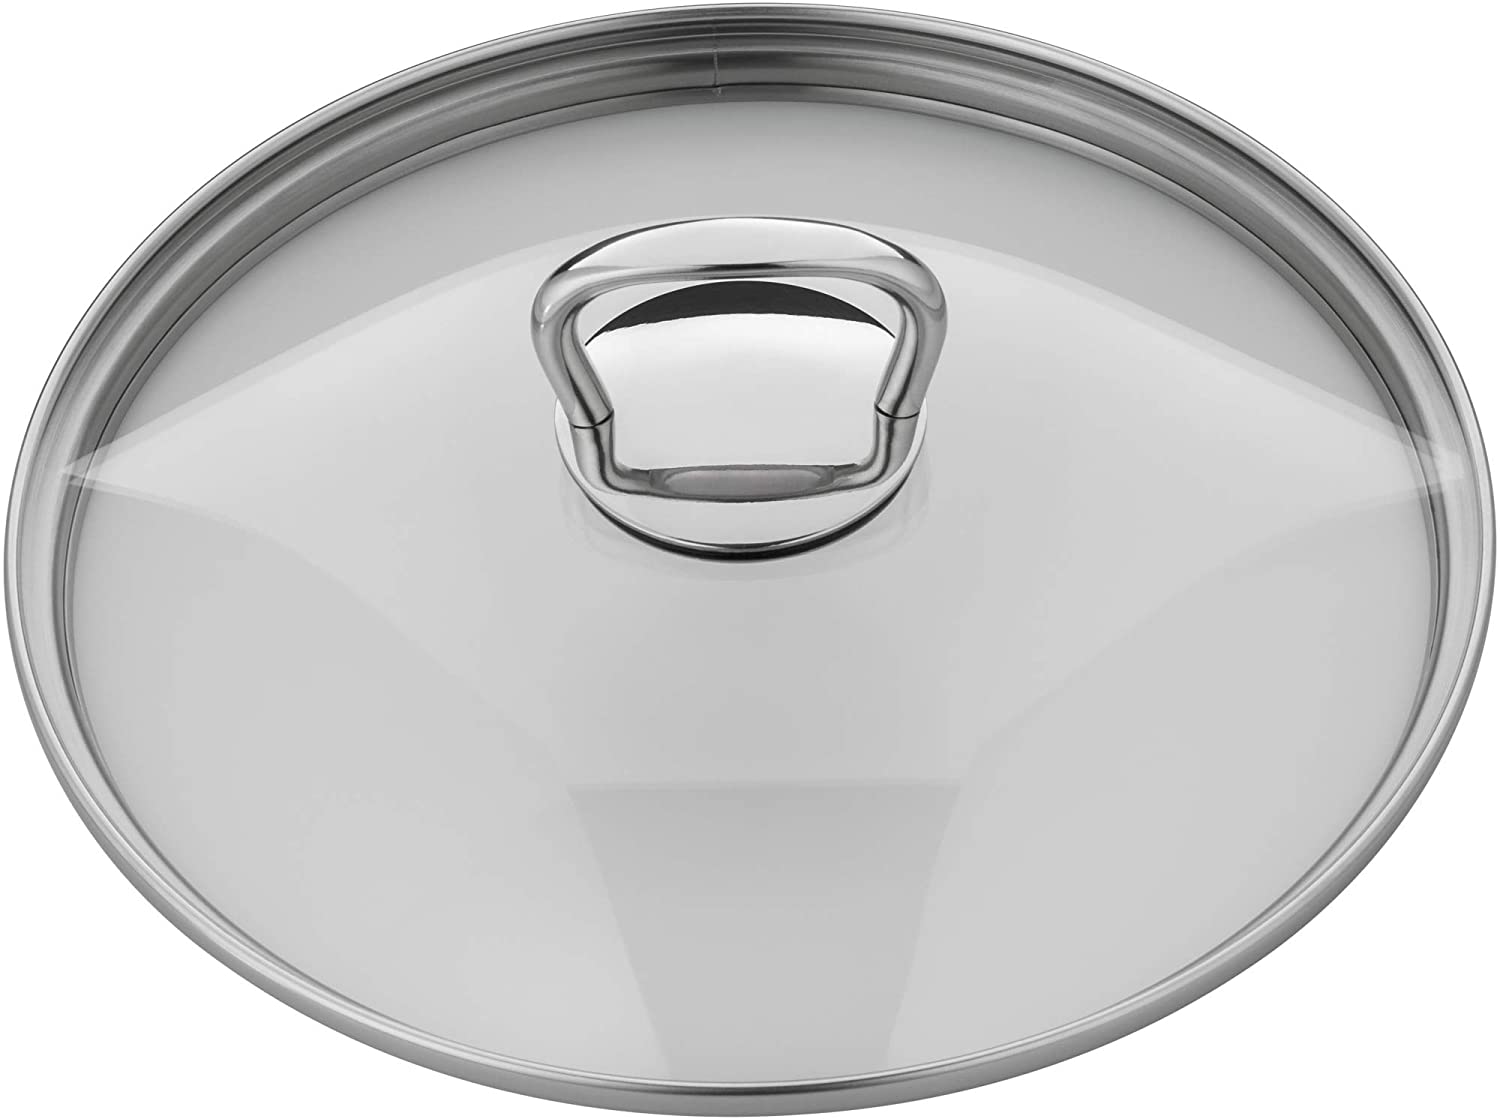 Silit Style Pot Lid 24 cm Glass Lid with Metal Handle Heat-resistant Glass Dishwasher Safe